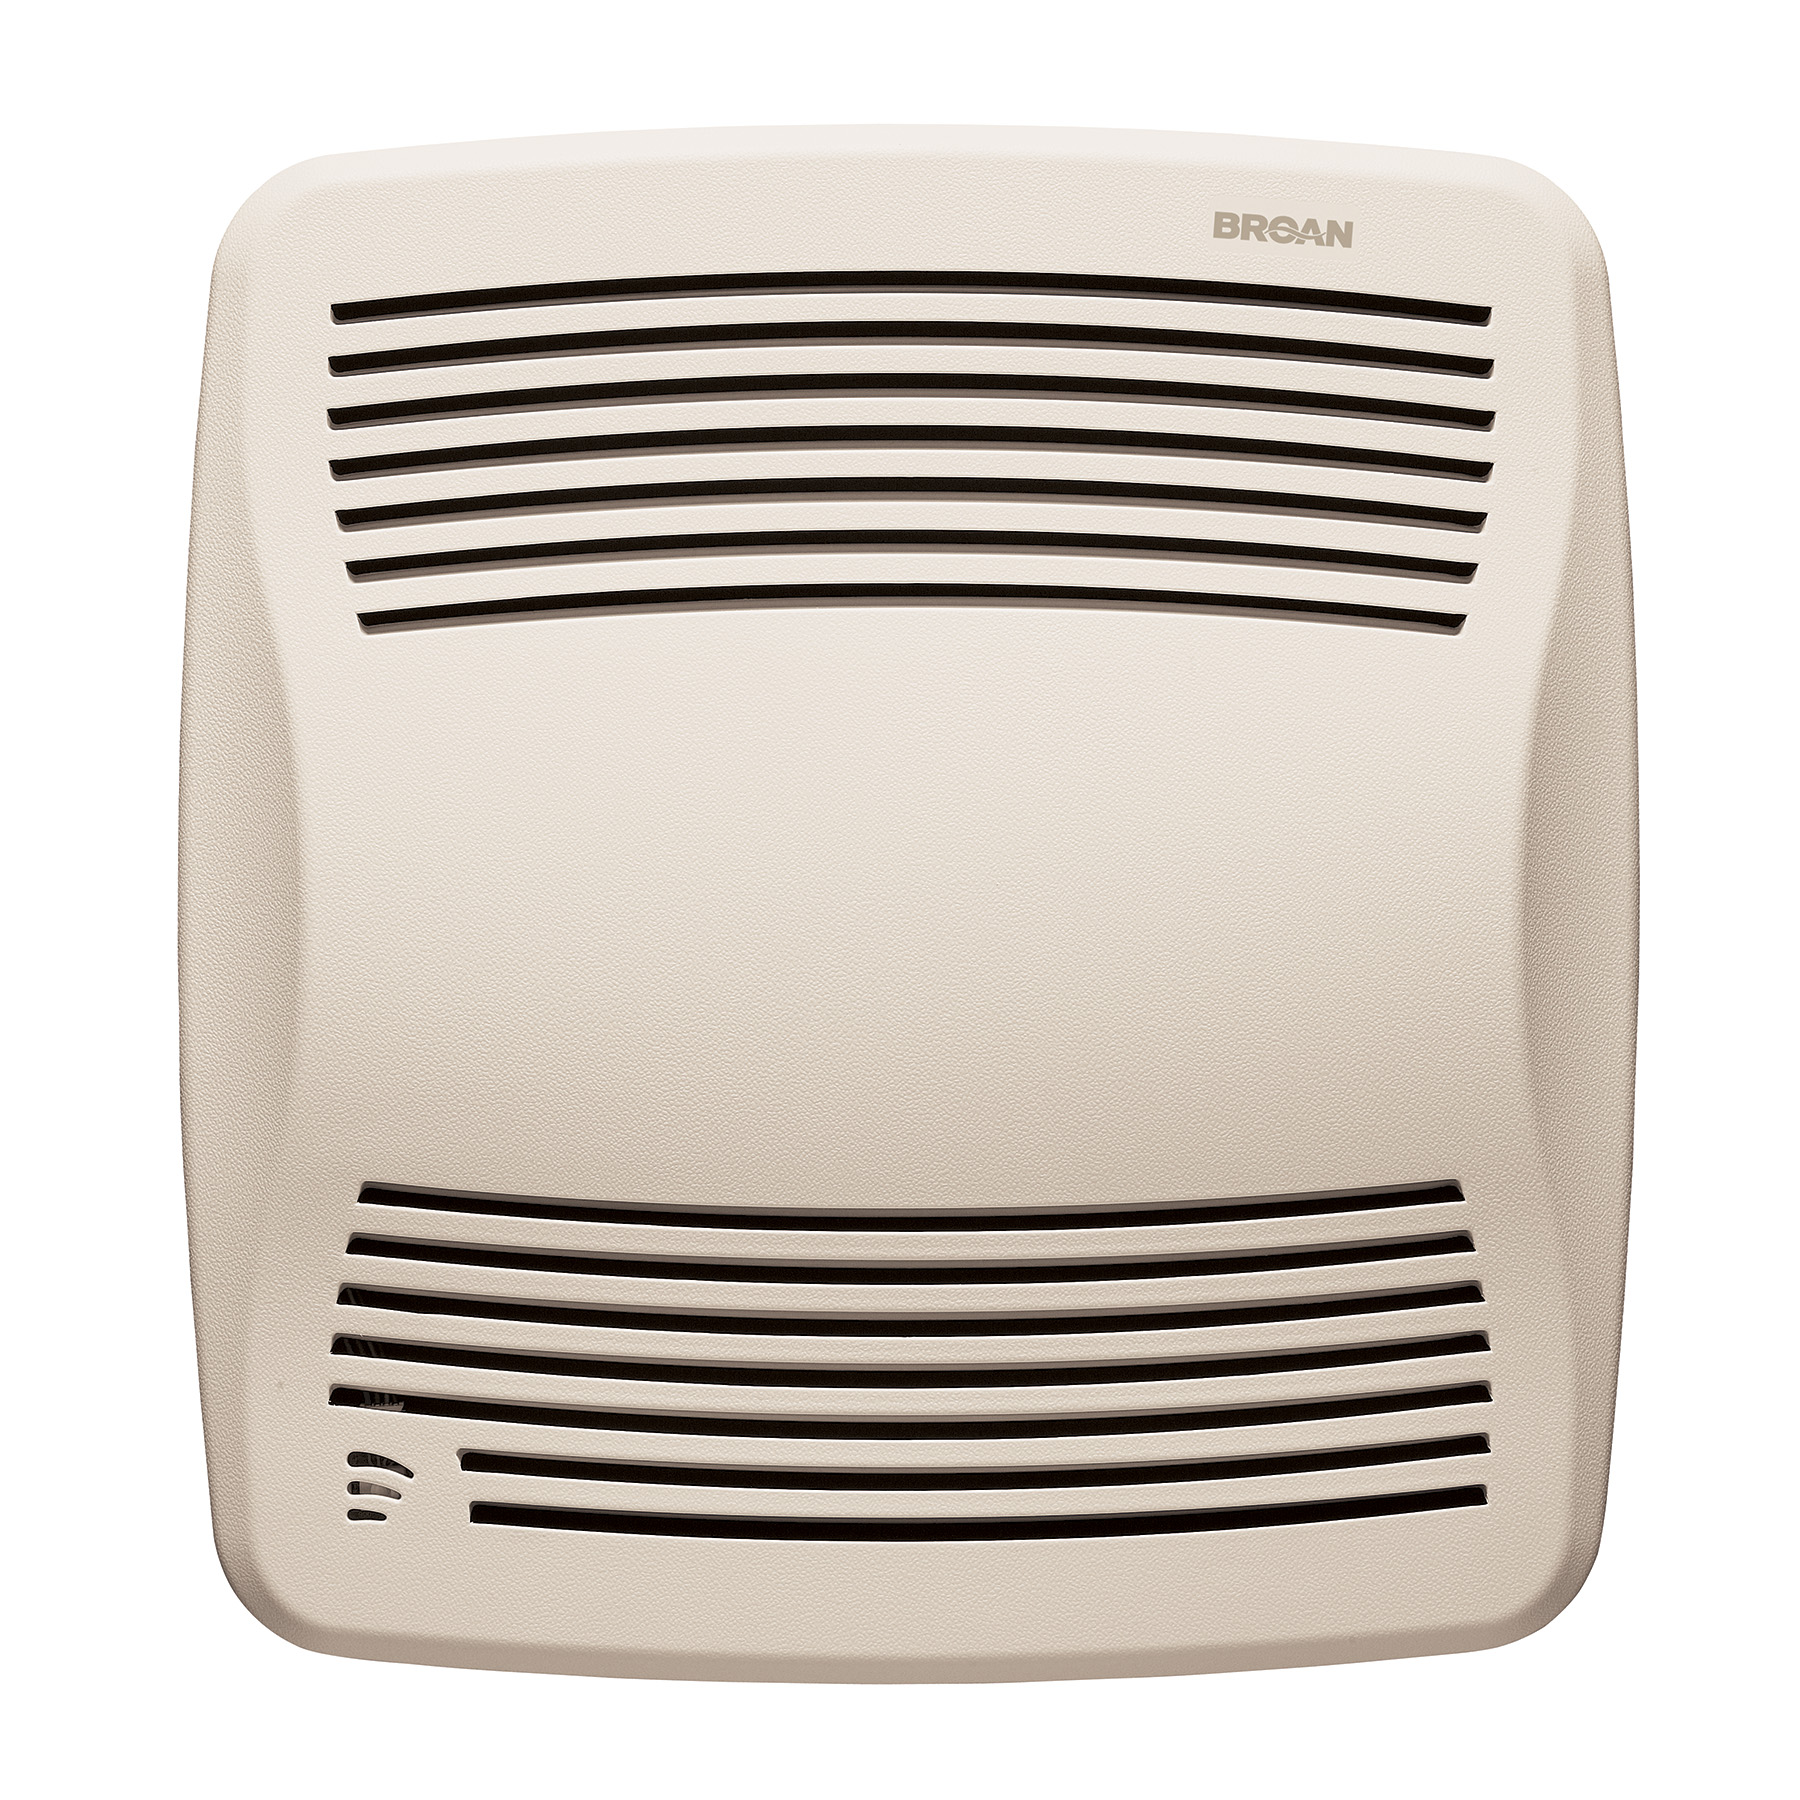 Broan® 110 CFM Humidity Sensing Ventilation Fan with White Grille, 0.7 Sones, ENERGY STAR Certified